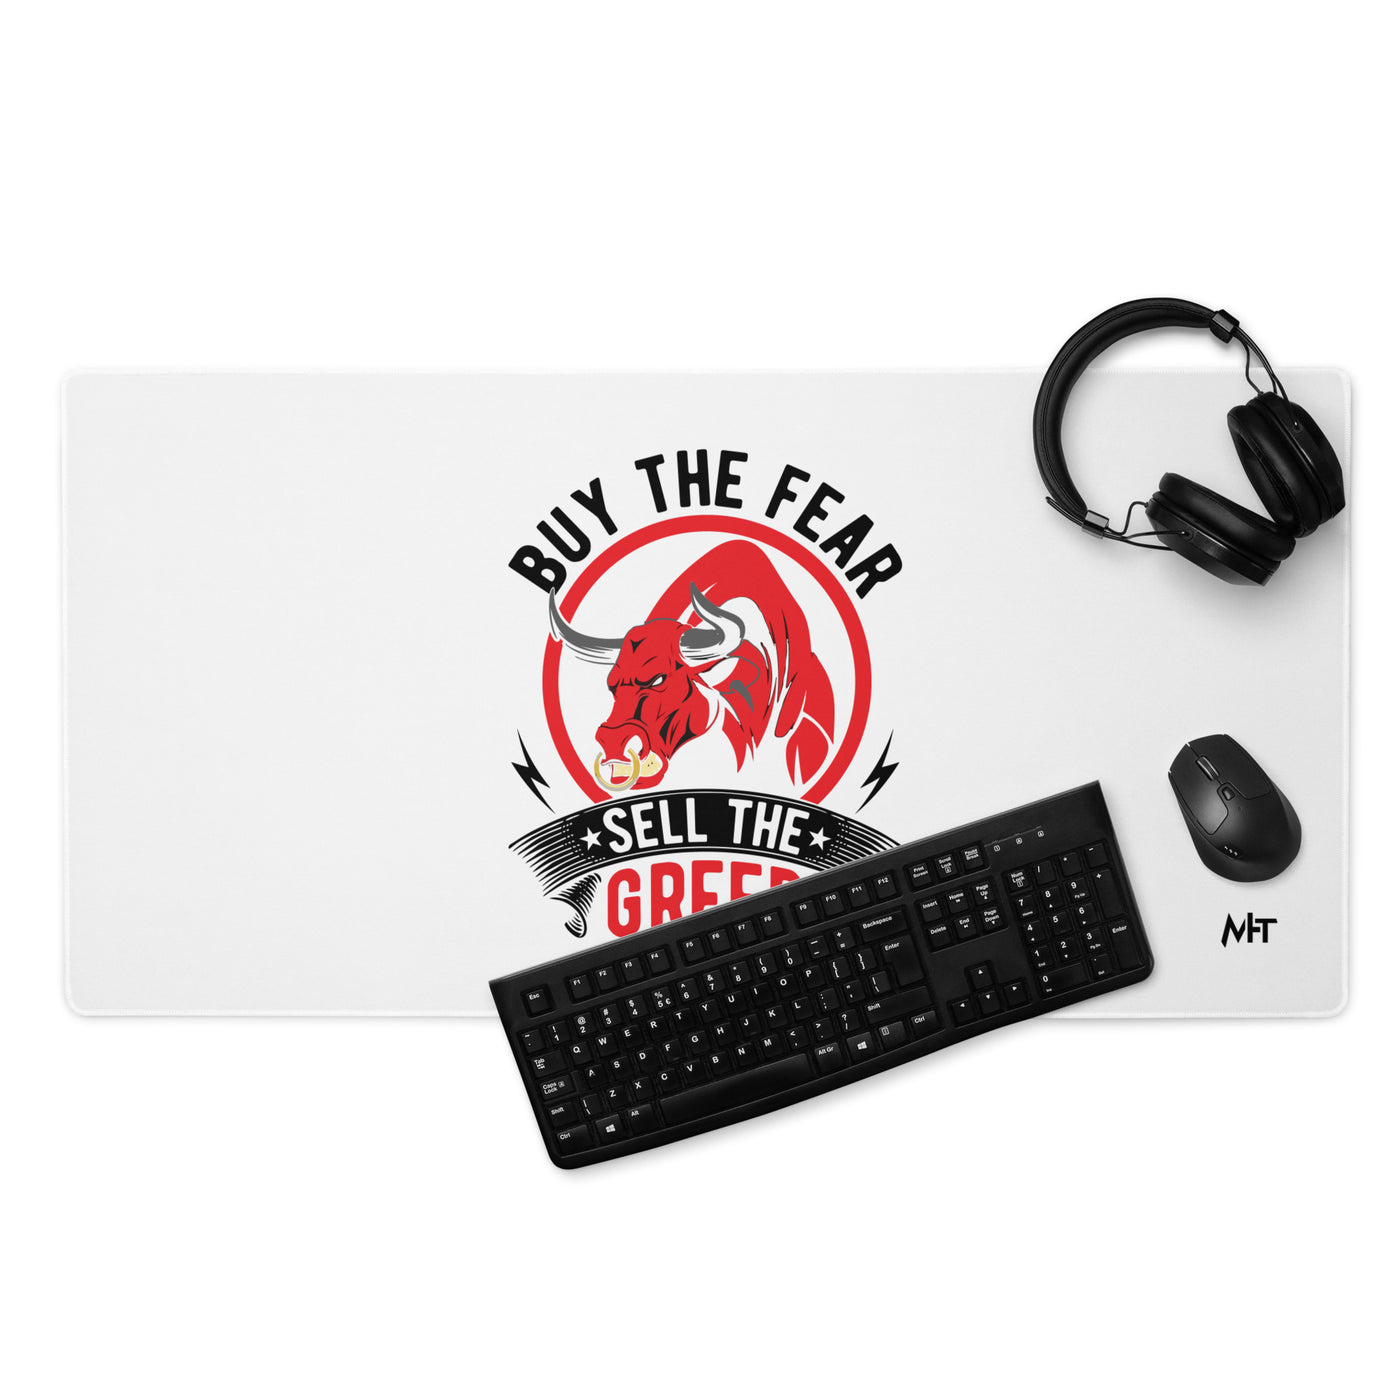 Buy the Fear; Sell the Greed in Dark Text - Desk Mat